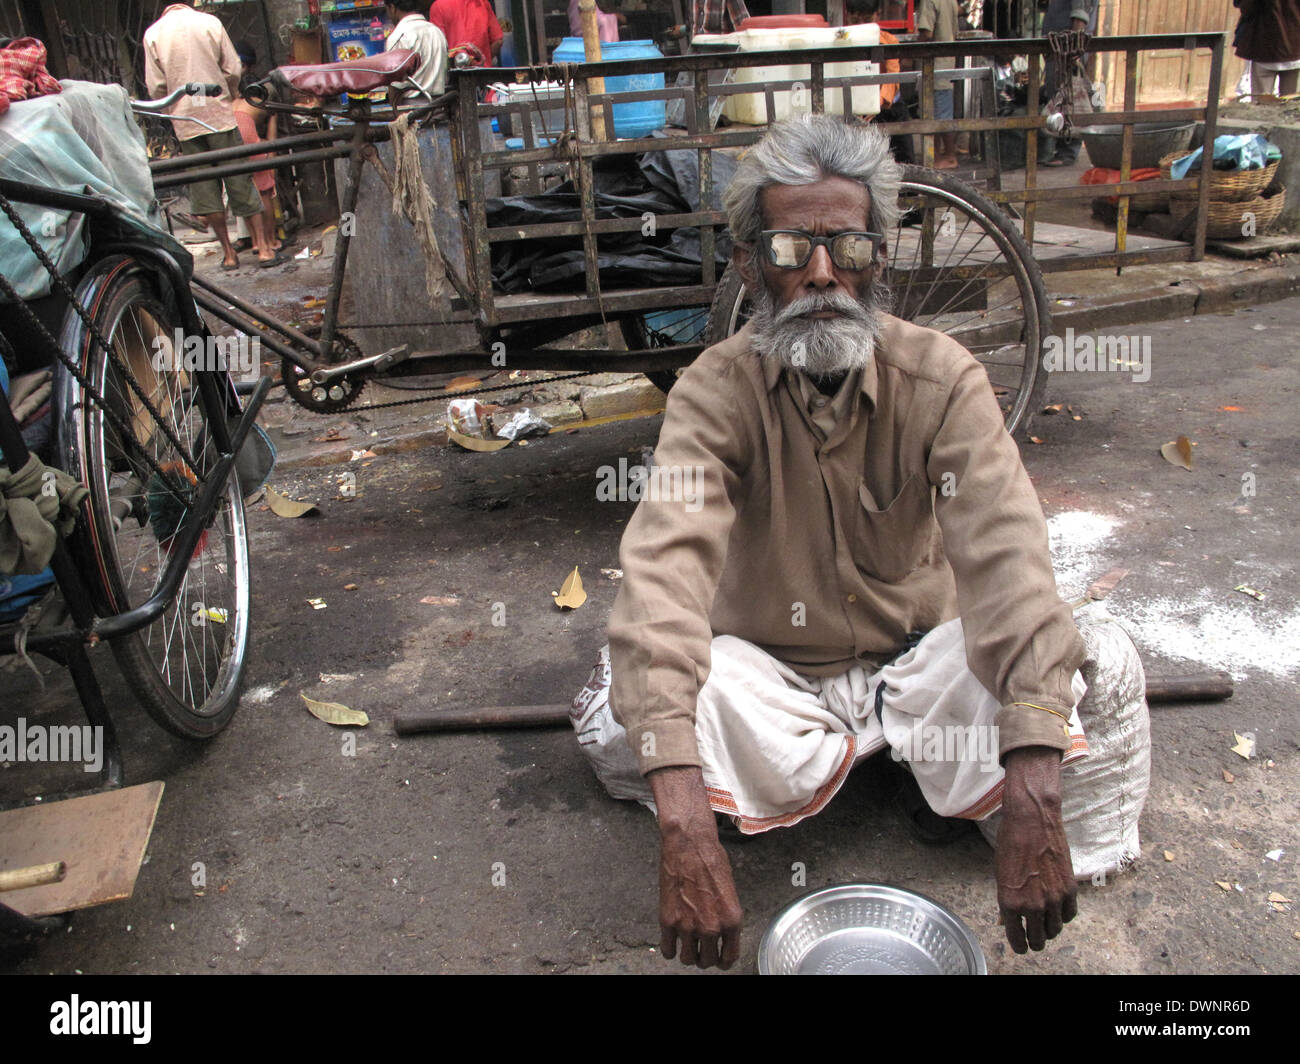 Streets of Kolkata. Thousands of beggars are the most disadvantaged castes living in the streets, January 24, 2009. Stock Photo